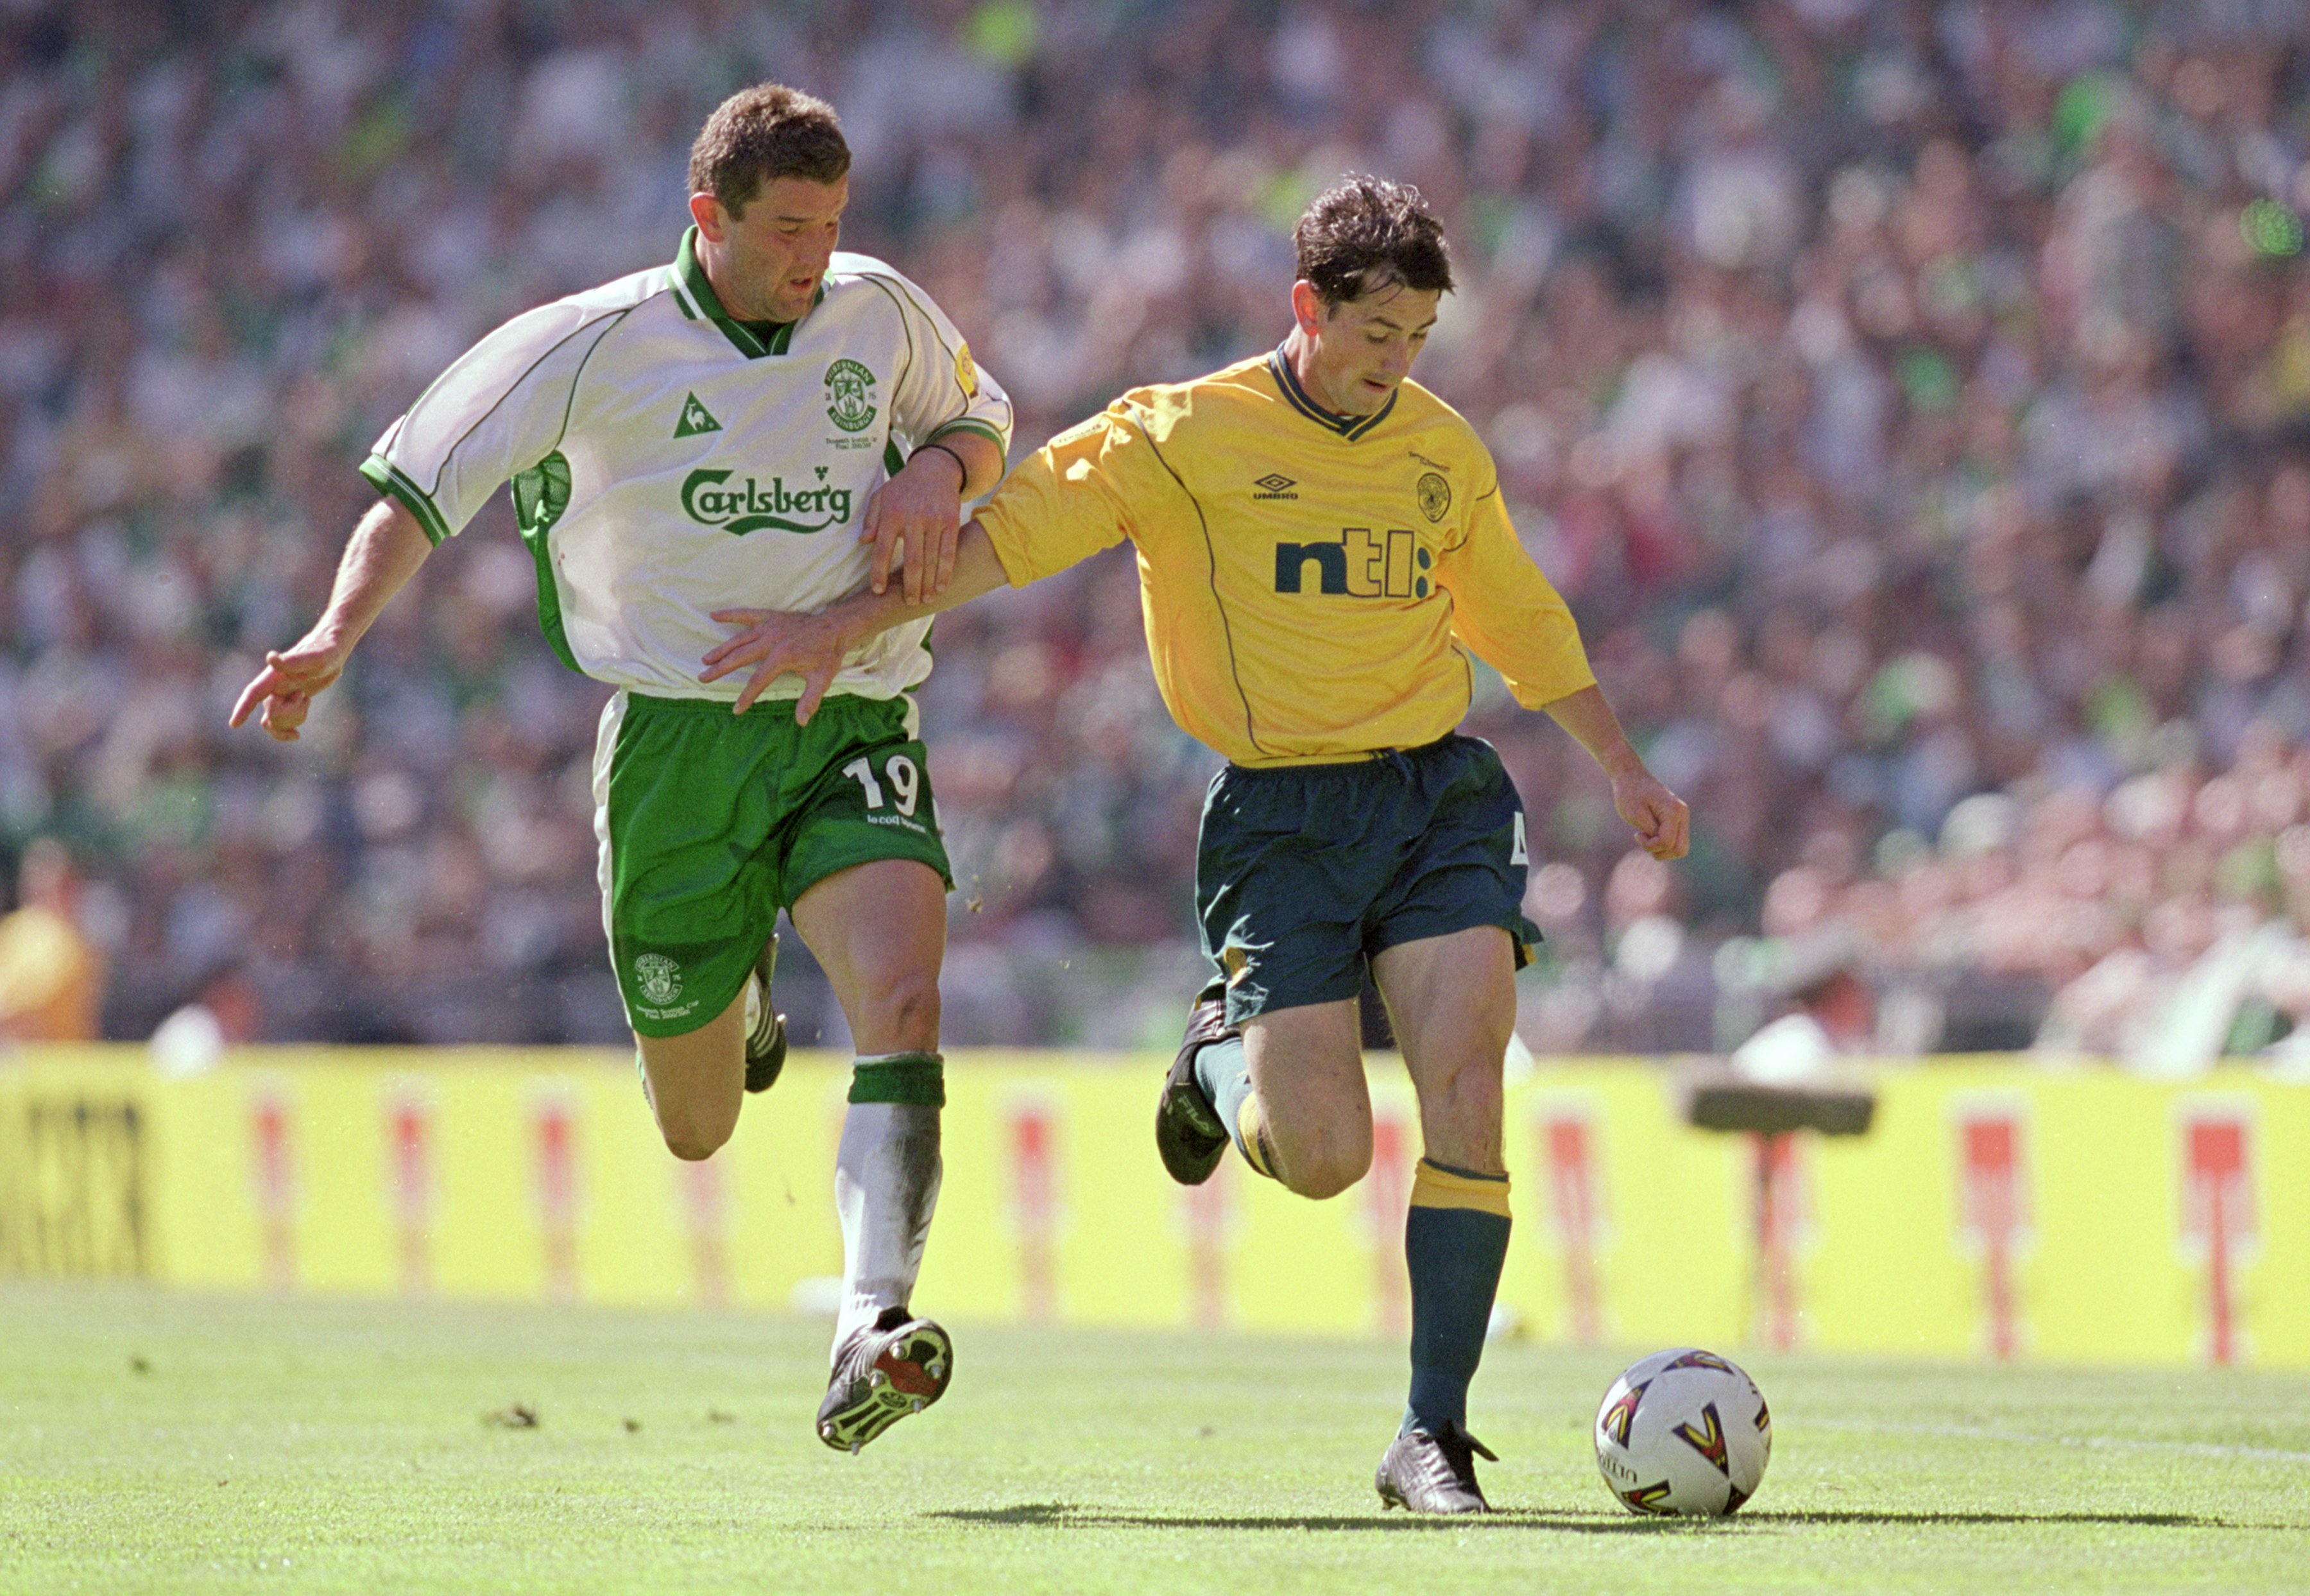 John Hartson leads messages of support to 'great friend' Jackie McNamara after reported illness